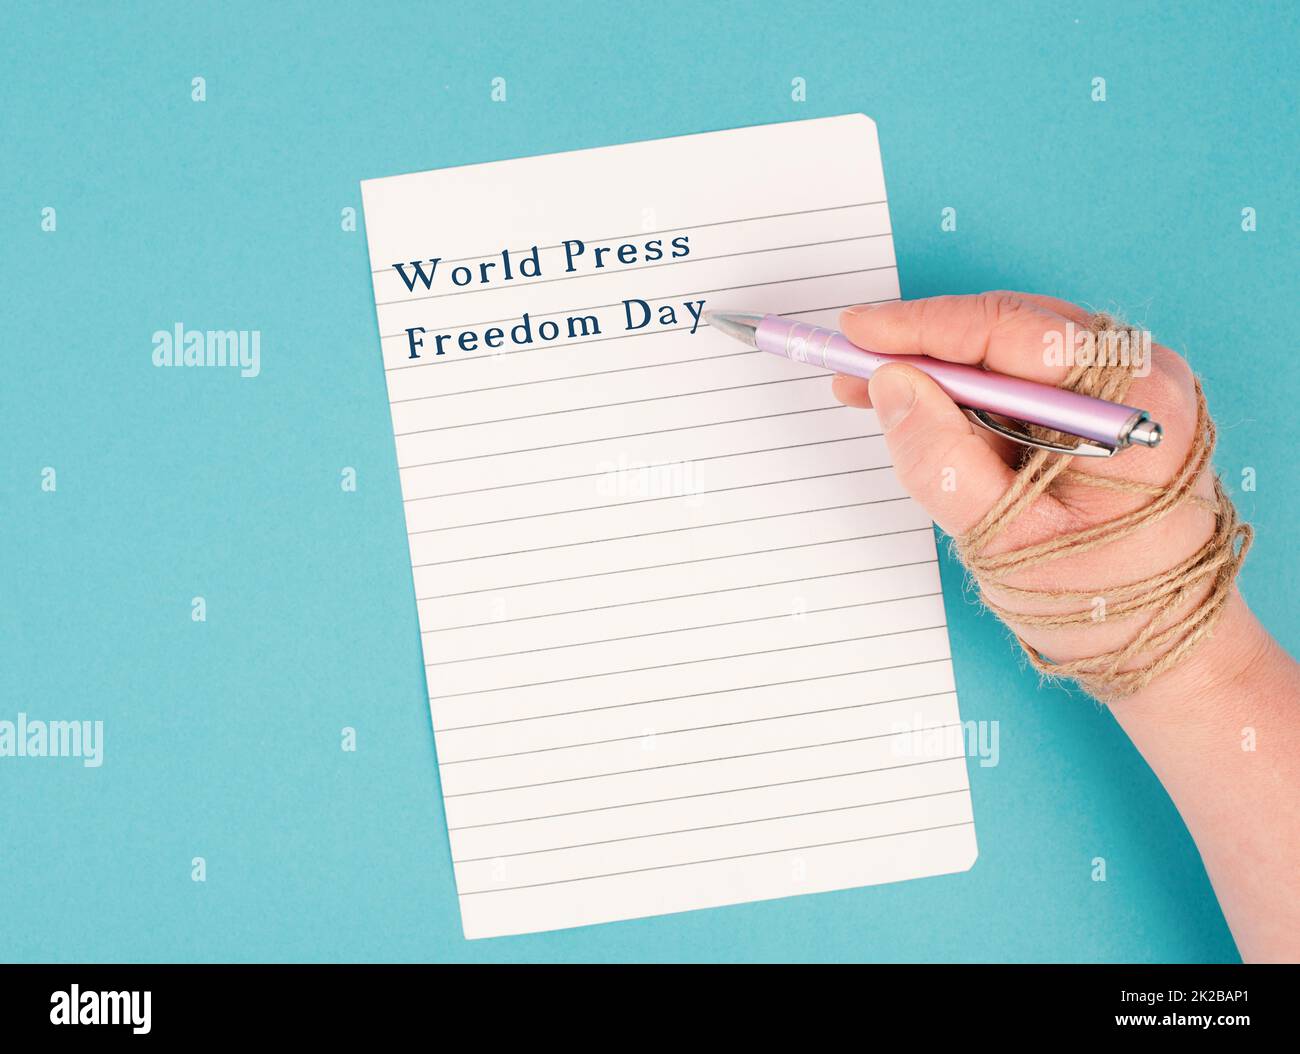 World Press Freedom Day is standing on a paper, hand with pen is chained, free speech, cancel culture, journalist writing Stock Photo